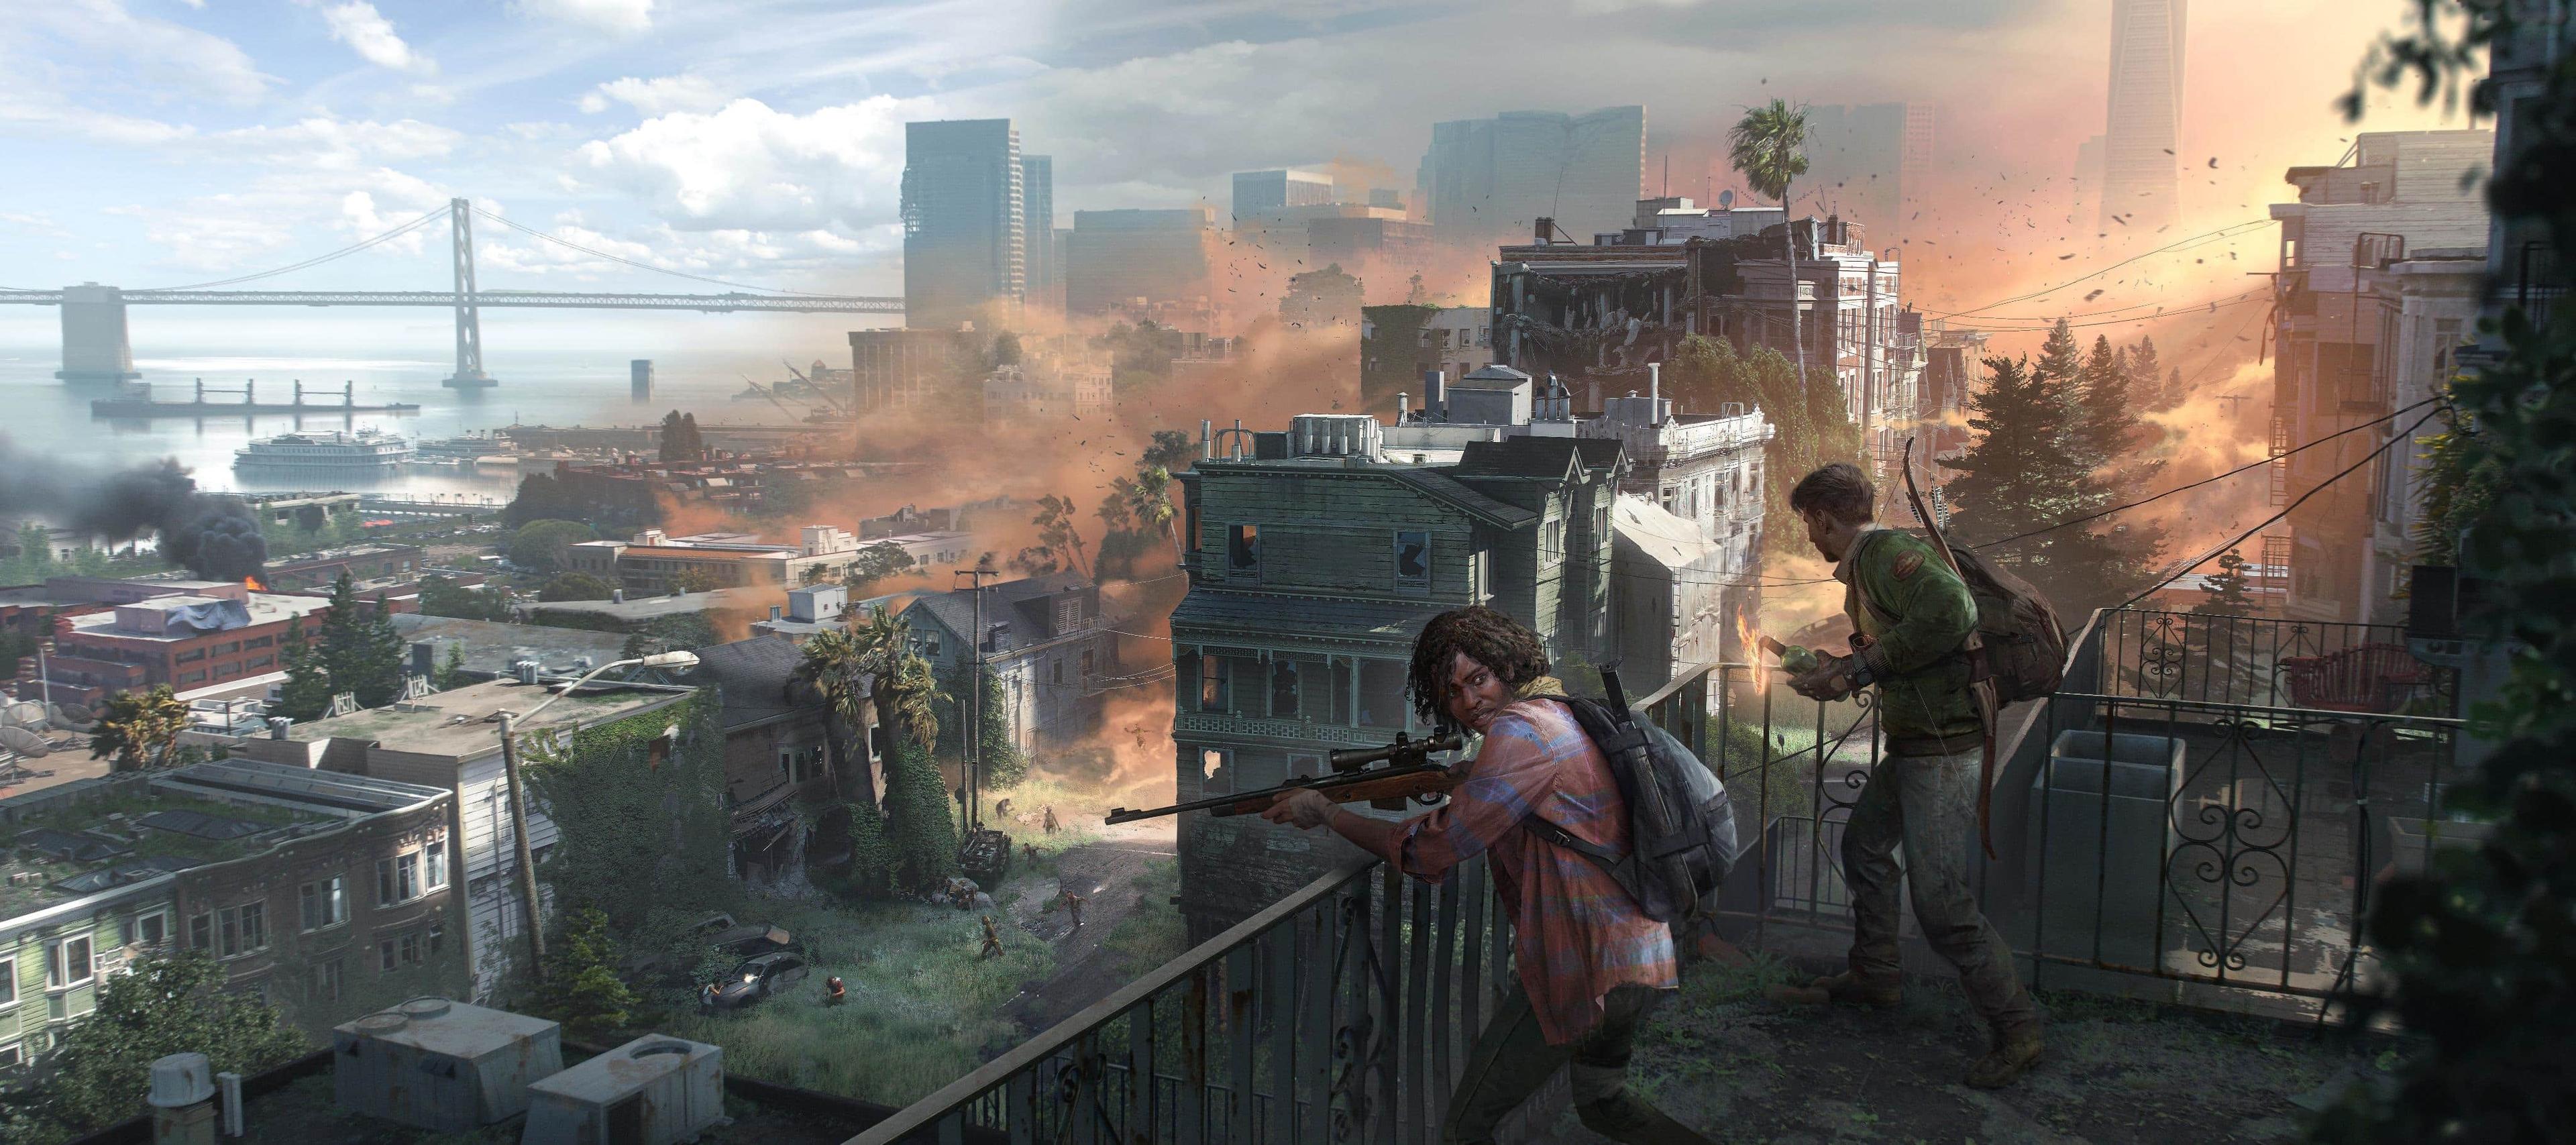 Impressive The Last Of Us Clicker Cosplay Applauded By Naughty Dog